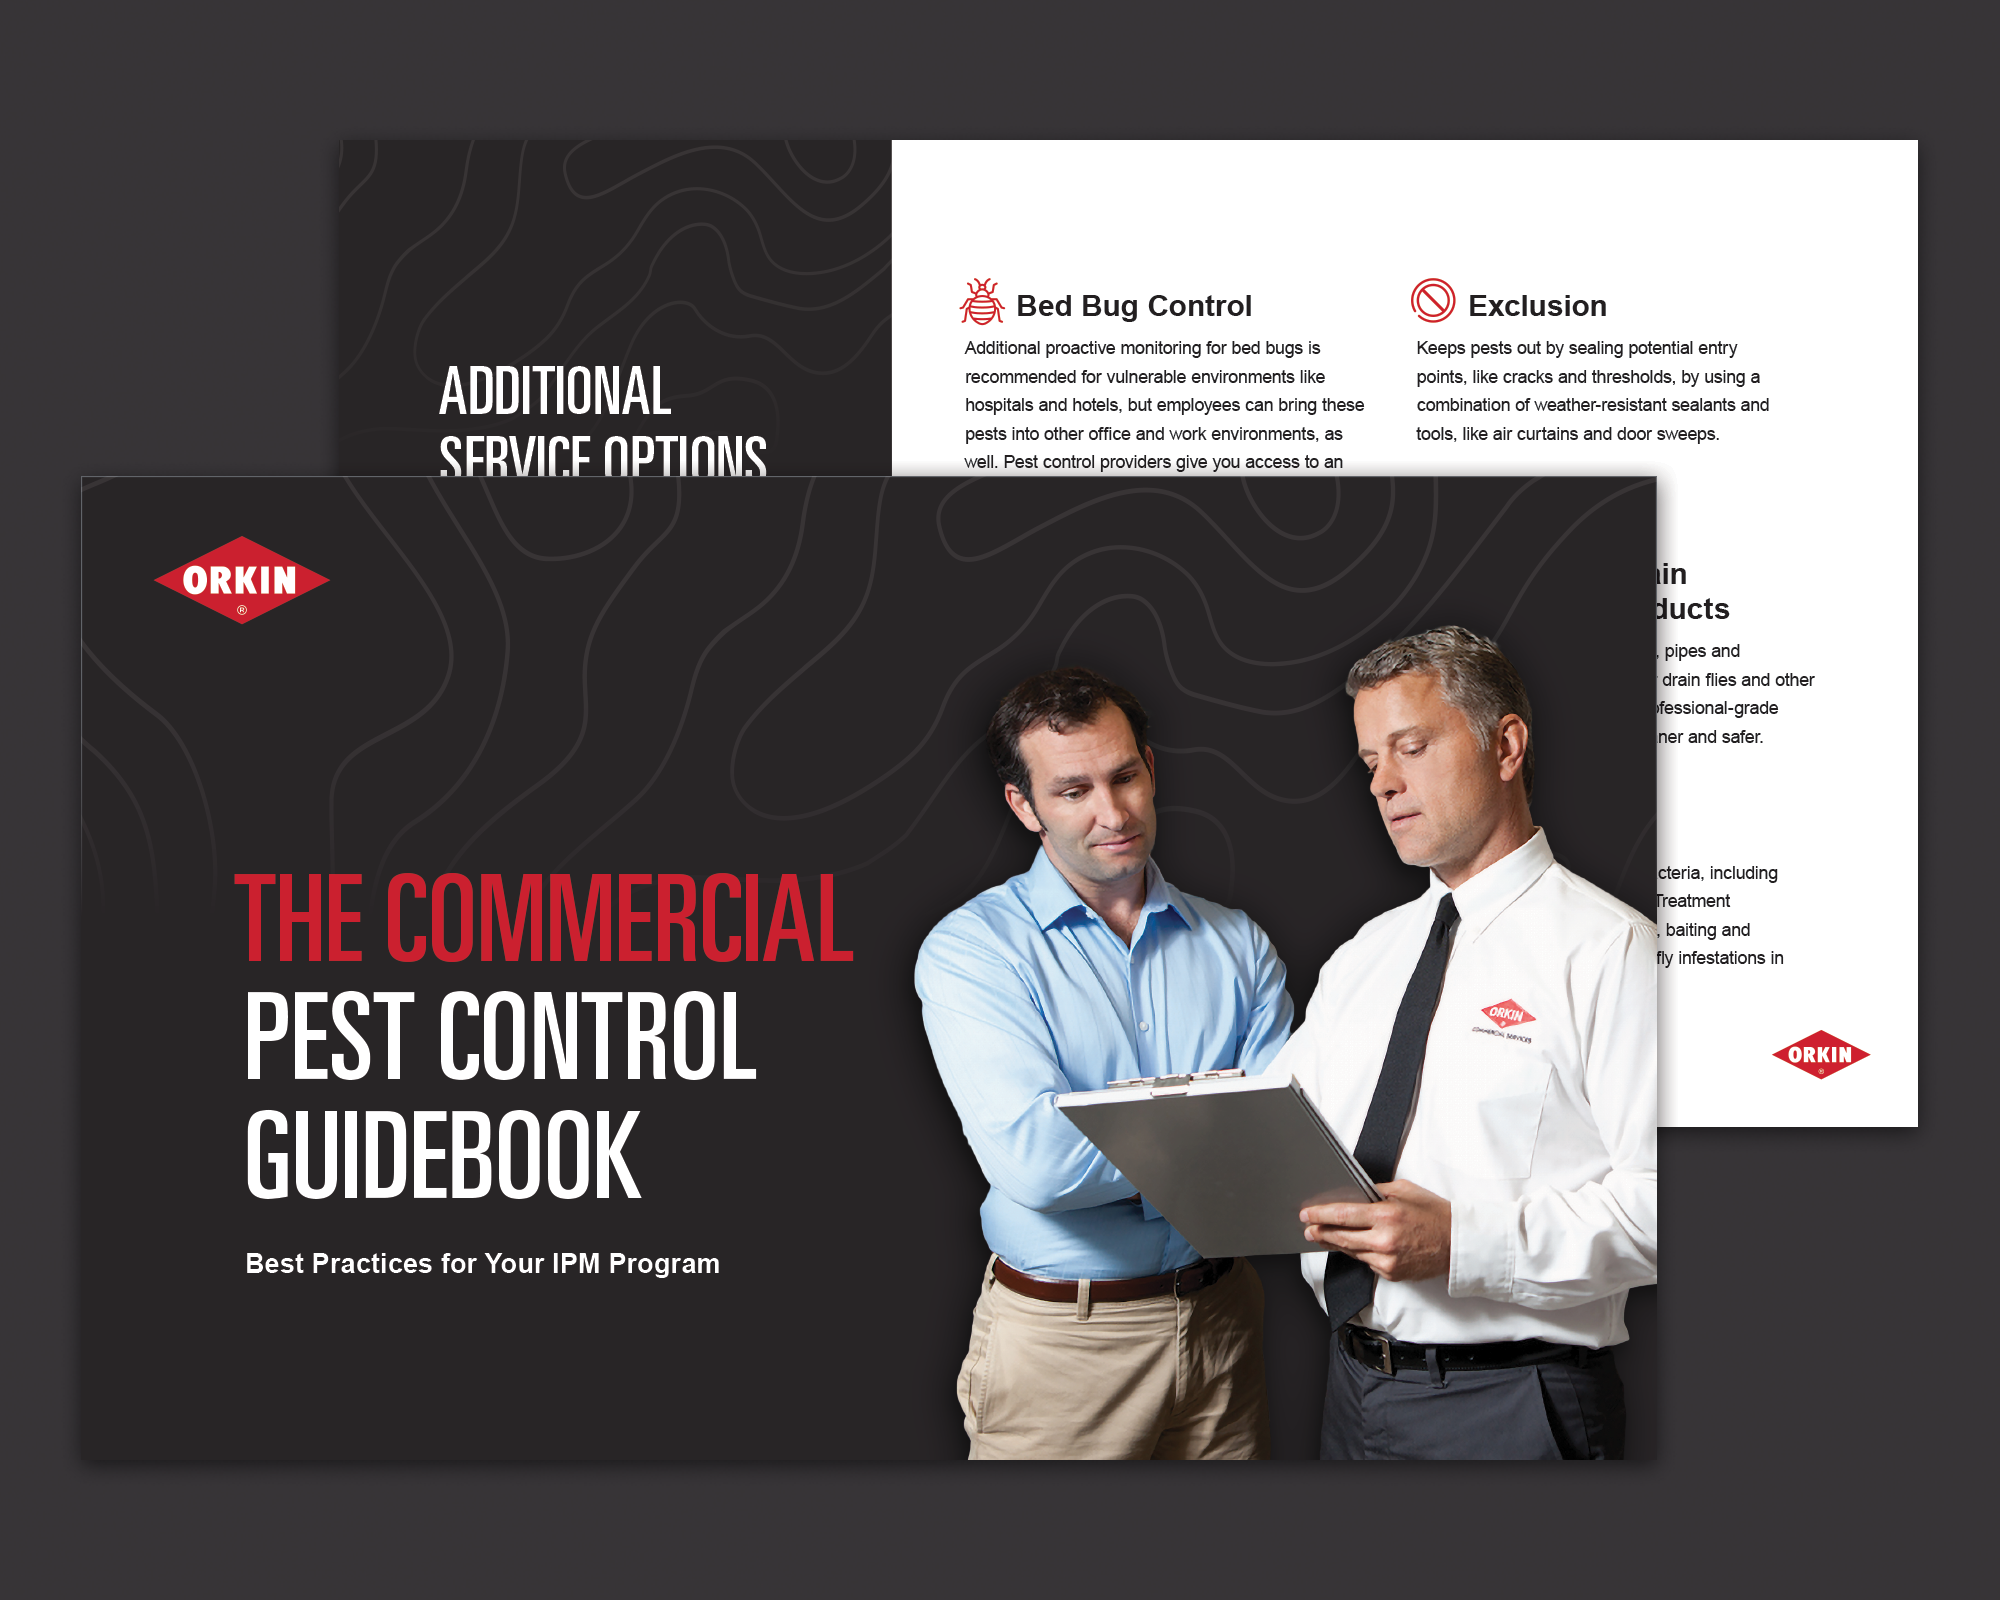 The Commercial Pest Control Guidebook_Landing Page Image_2000x1600.png